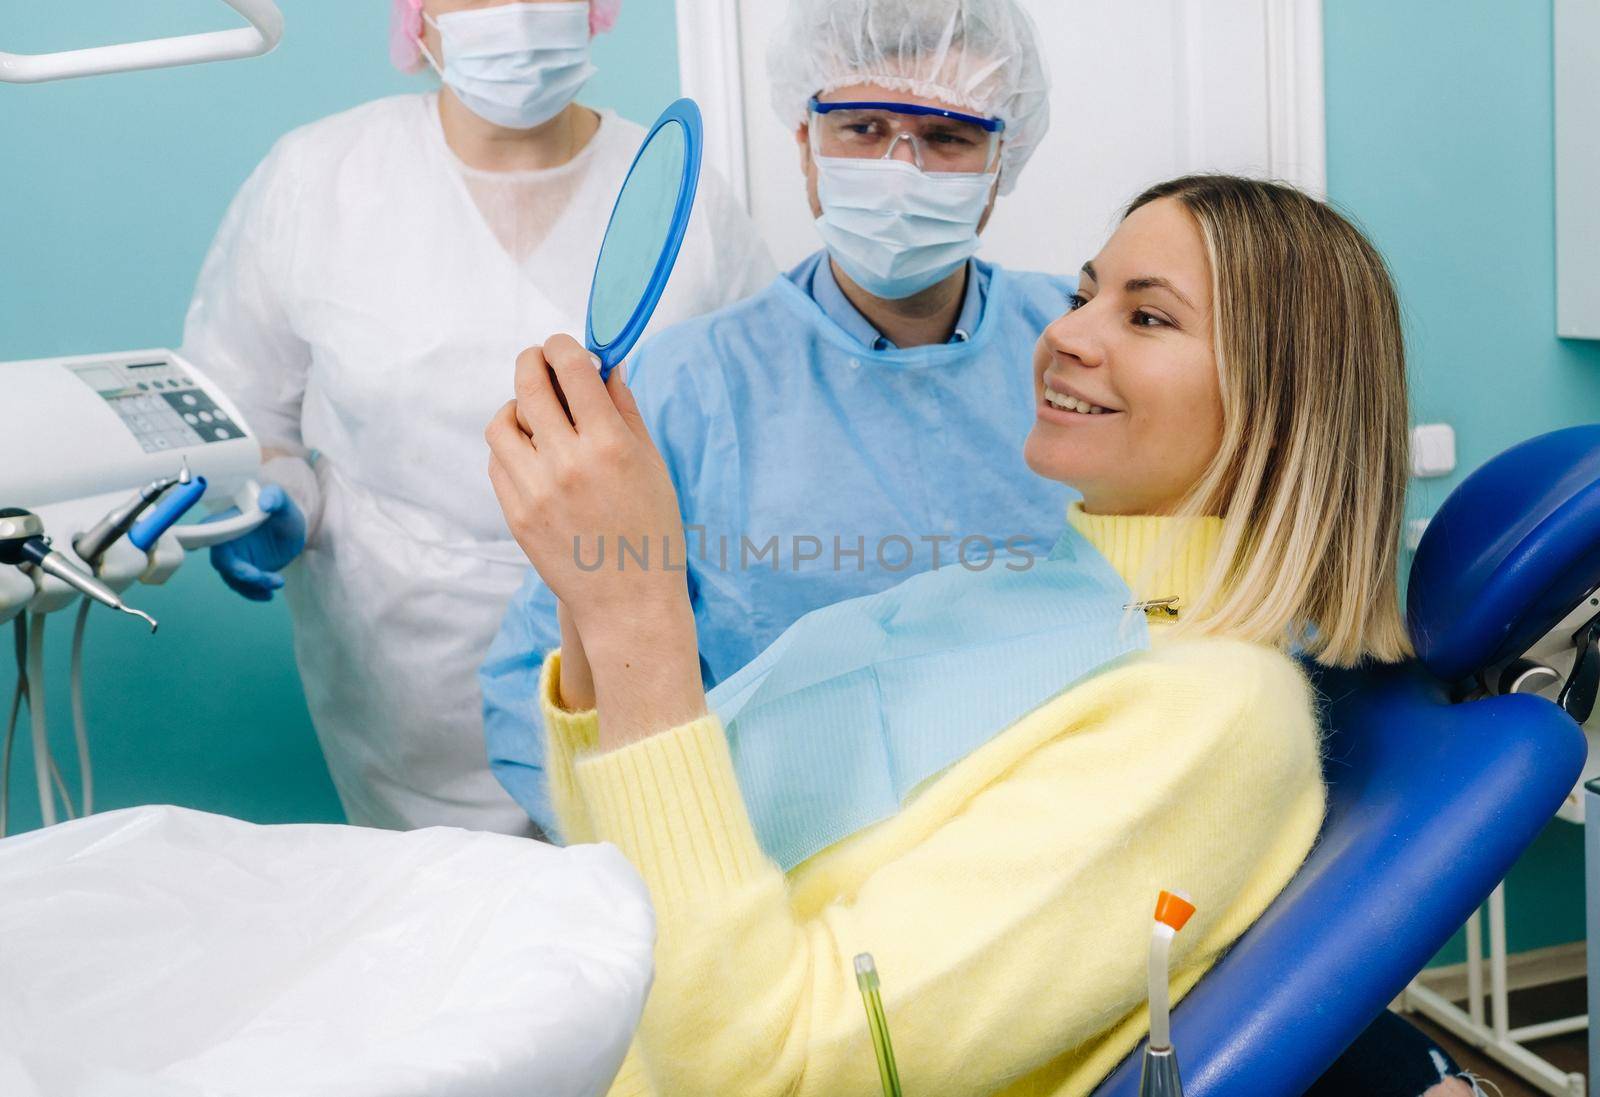 The dentist shows the client the results of his work in the mirror.